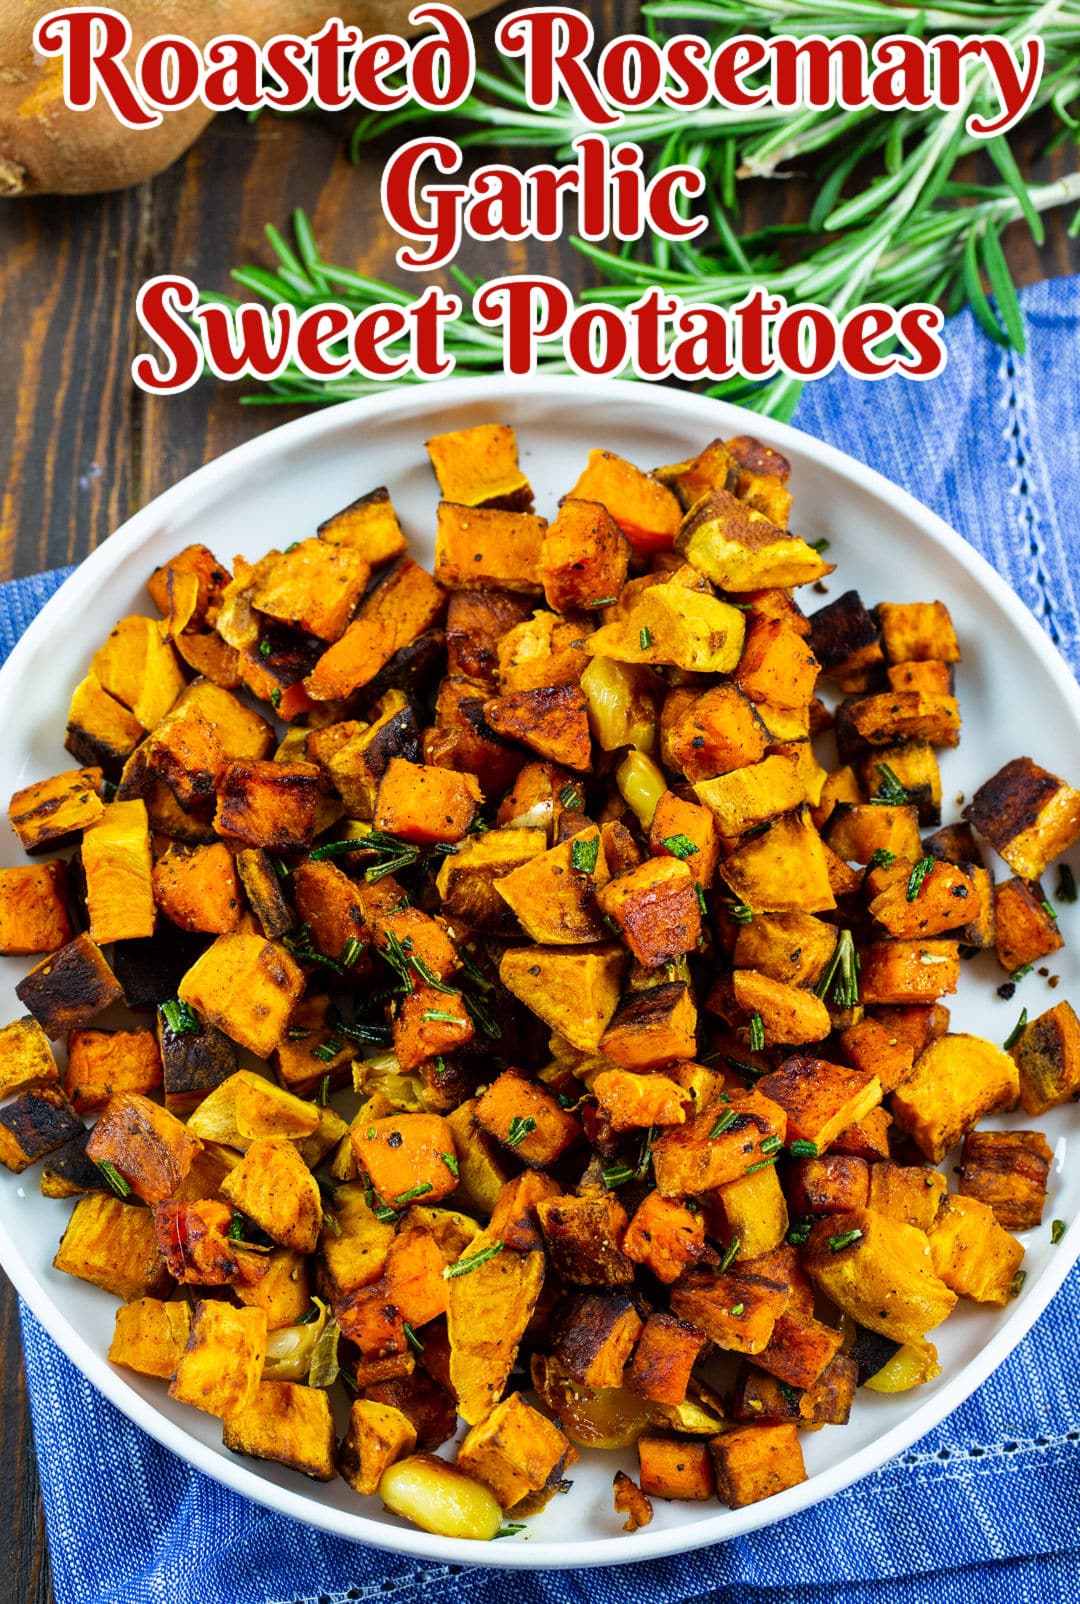 Roasted Rosemary Garlic Sweet Potatoes on a serving plate.